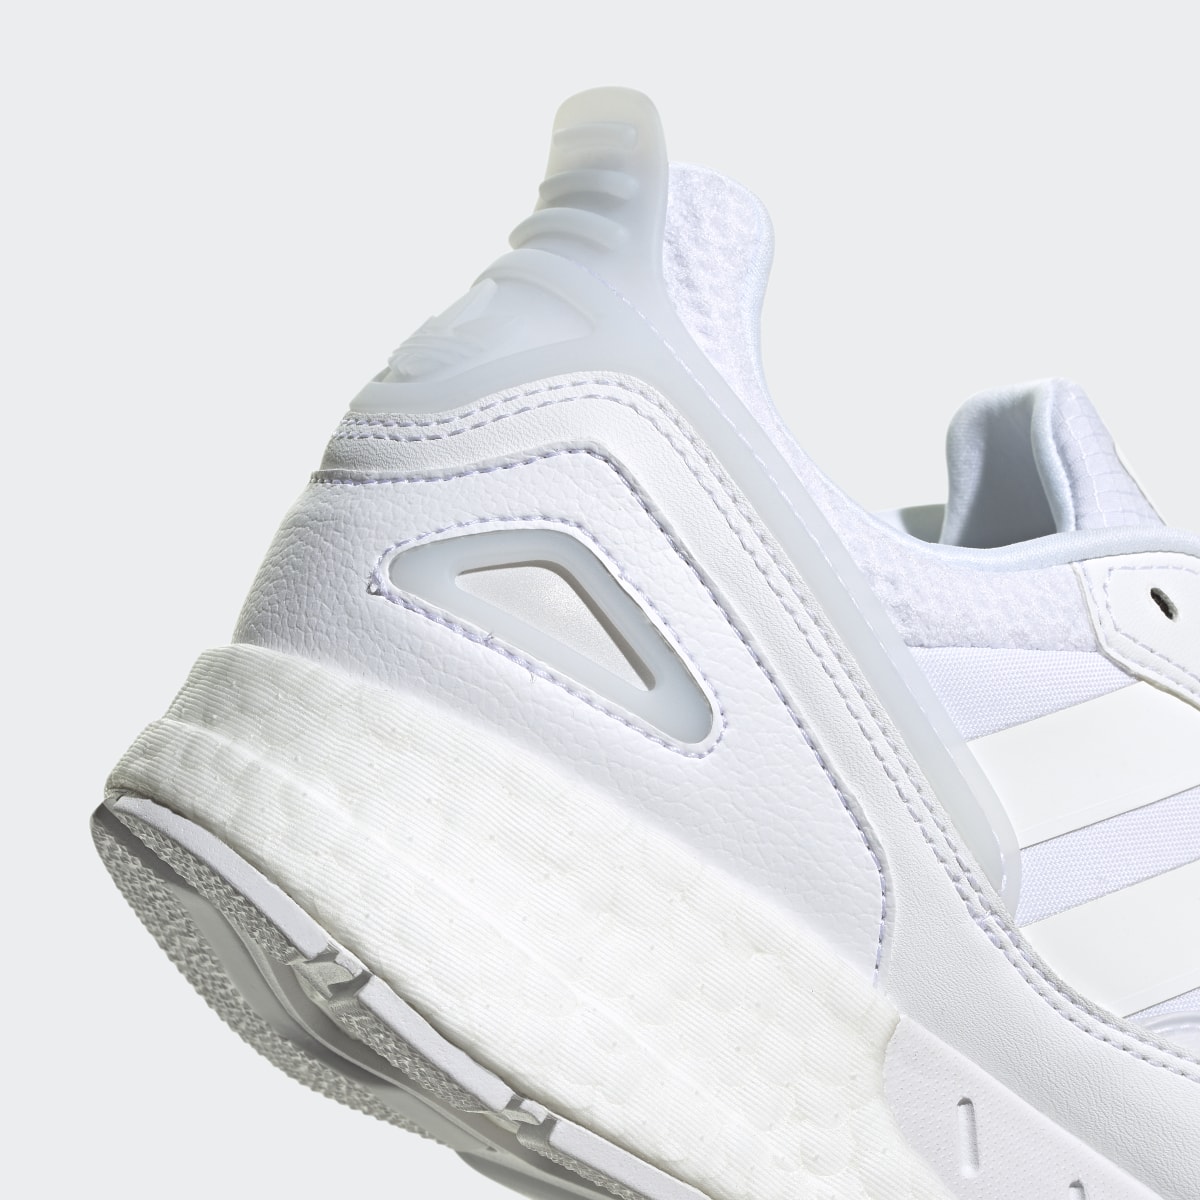 Adidas ZX 1K Boost 2.0 Shoes. 9